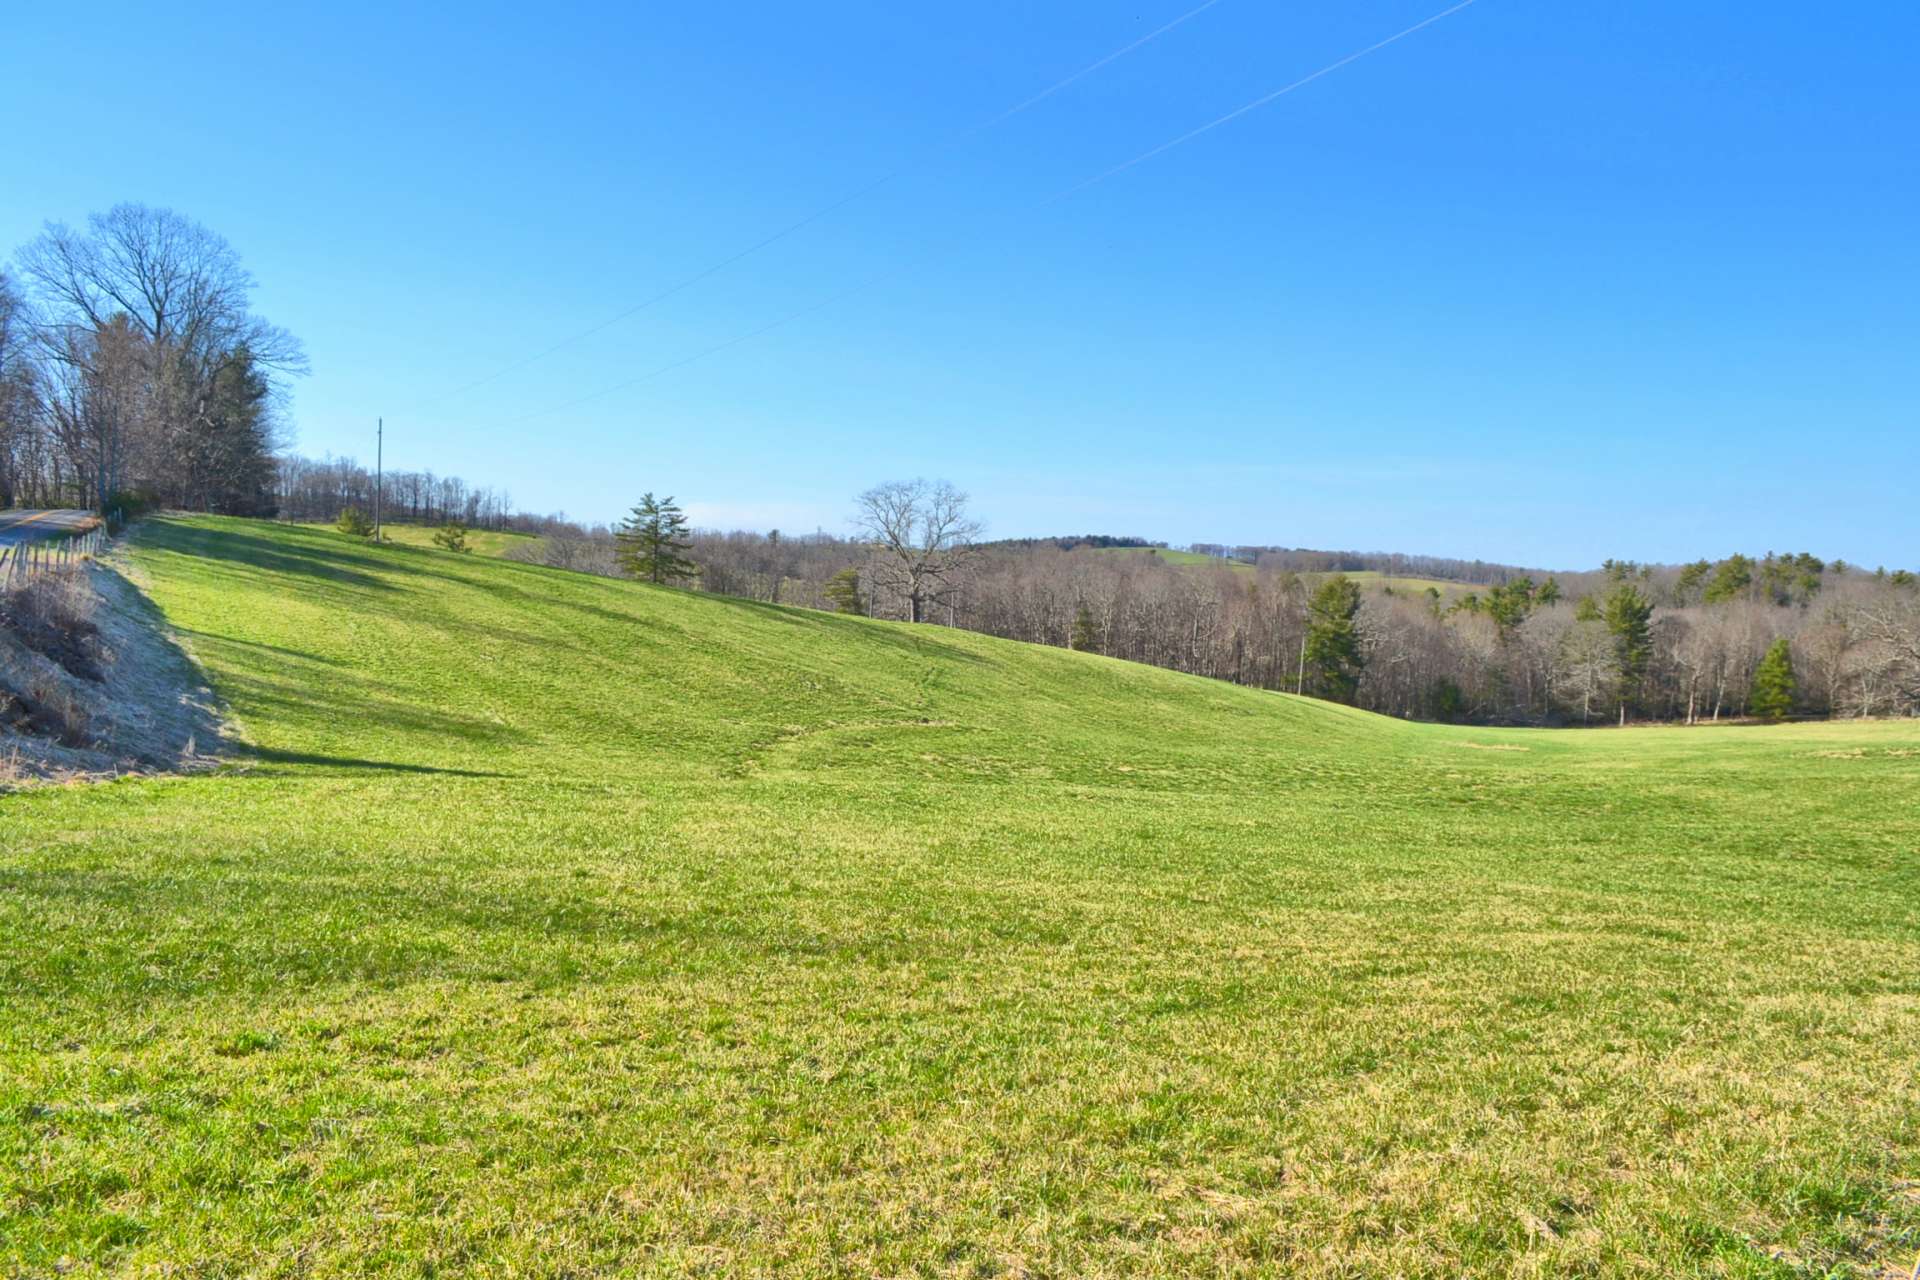 An additional adjoining 18.8 acres is also available for purchase.  Call today for additional information or an appointment to view this one of kind property just off the Blue Ridge Parkway.